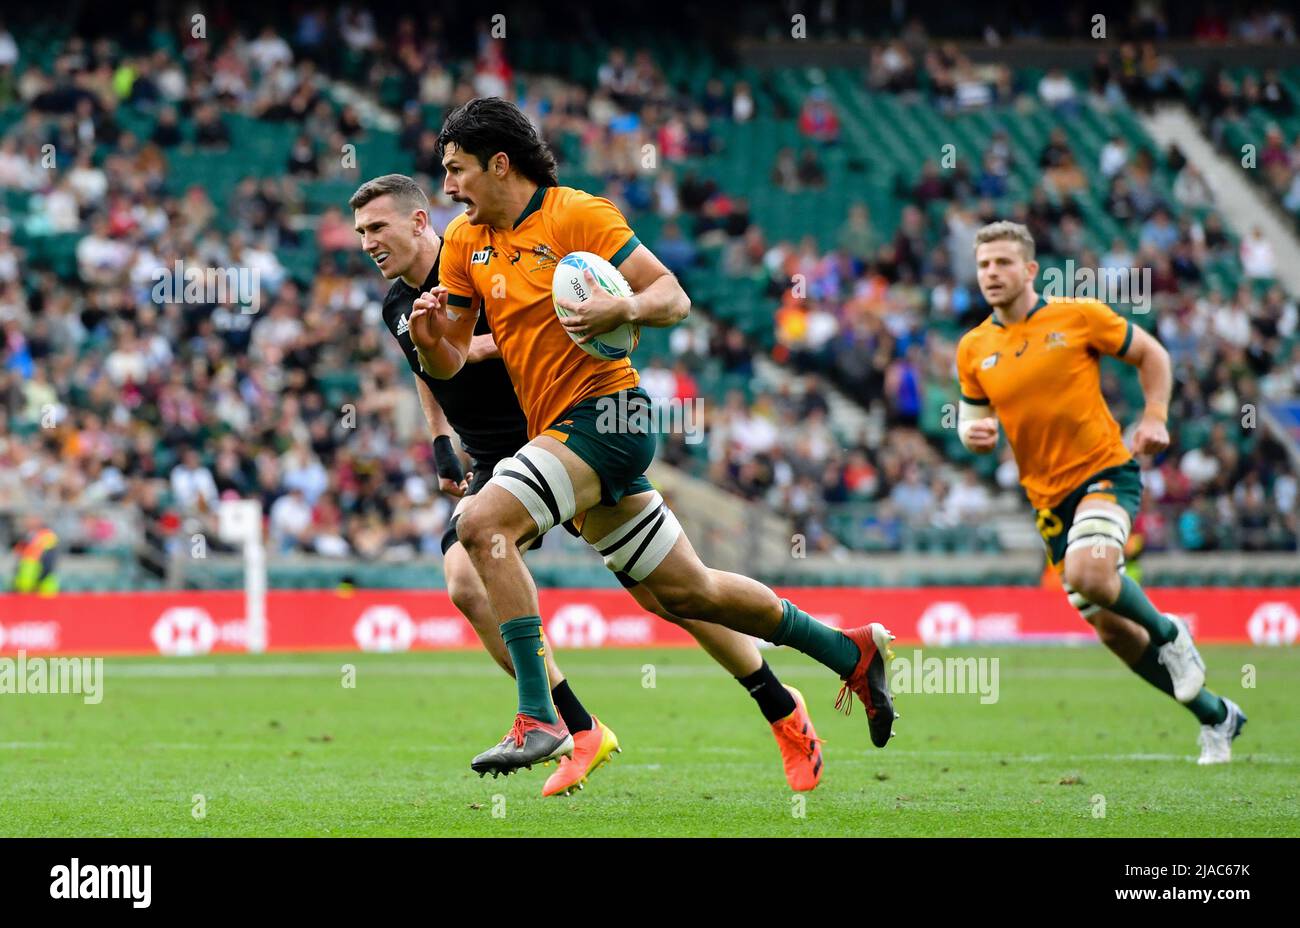 HSBC World Rugby Sevens Series Final, Twickenham Stadium, England, UK. 29th May, 2022. Henry Paterson of Australia scores his sides first try during the HSBC World Rugby Sevens Series Final between Australia 7s and New Zealand 7s: Credit: Ashley Western/Alamy Live News Stock Photo